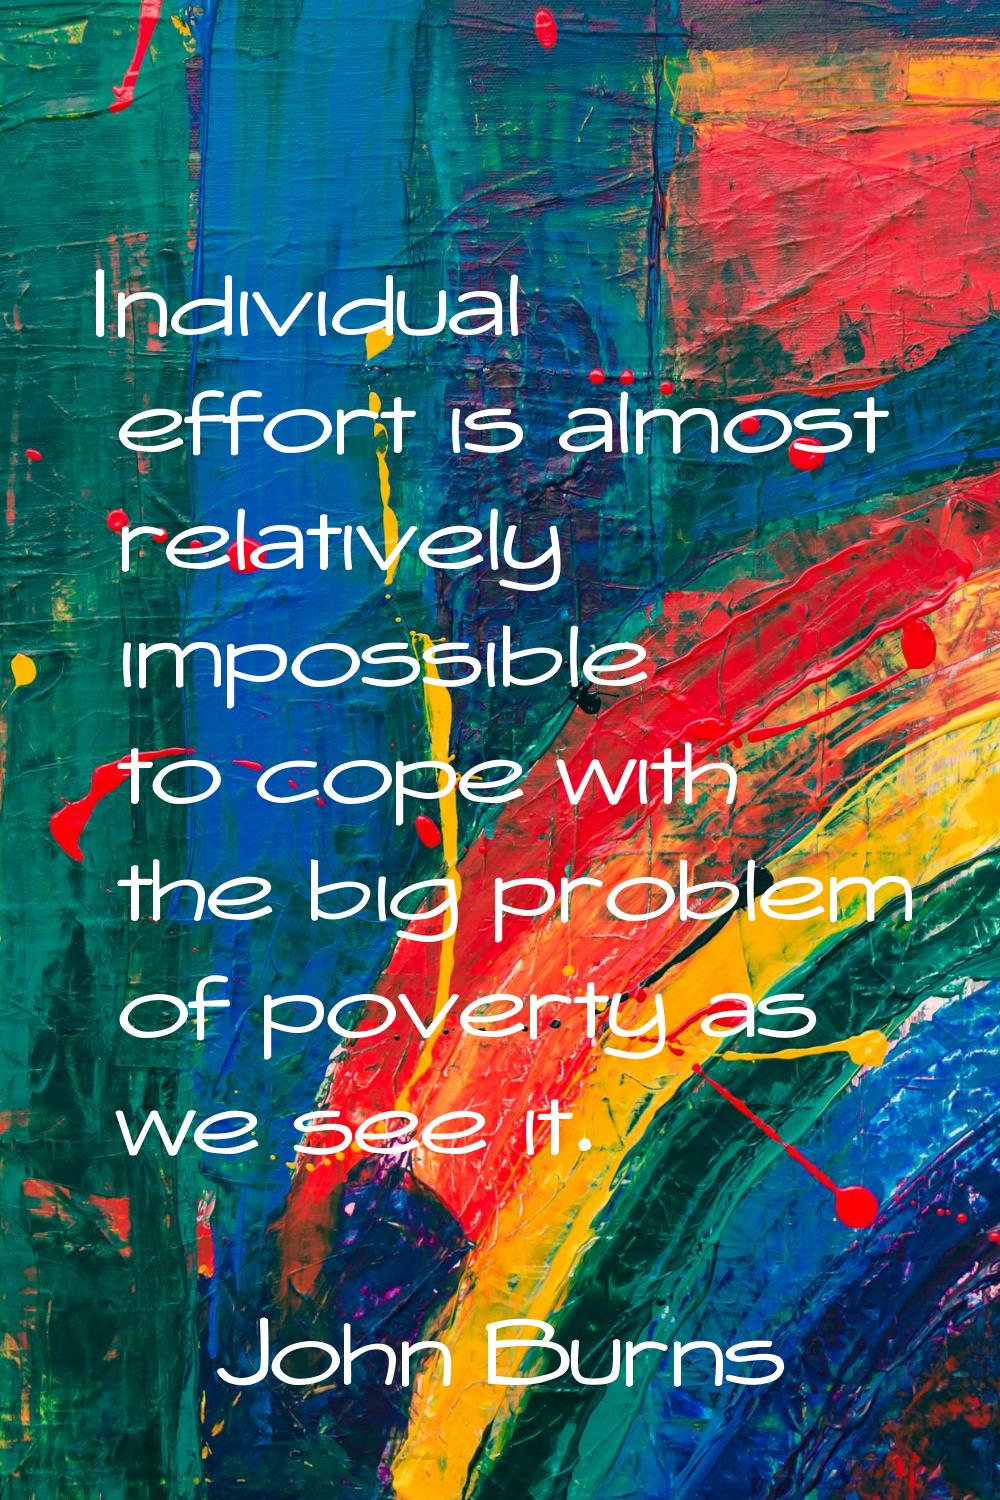 Individual effort is almost relatively impossible to cope with the big problem of poverty as we see